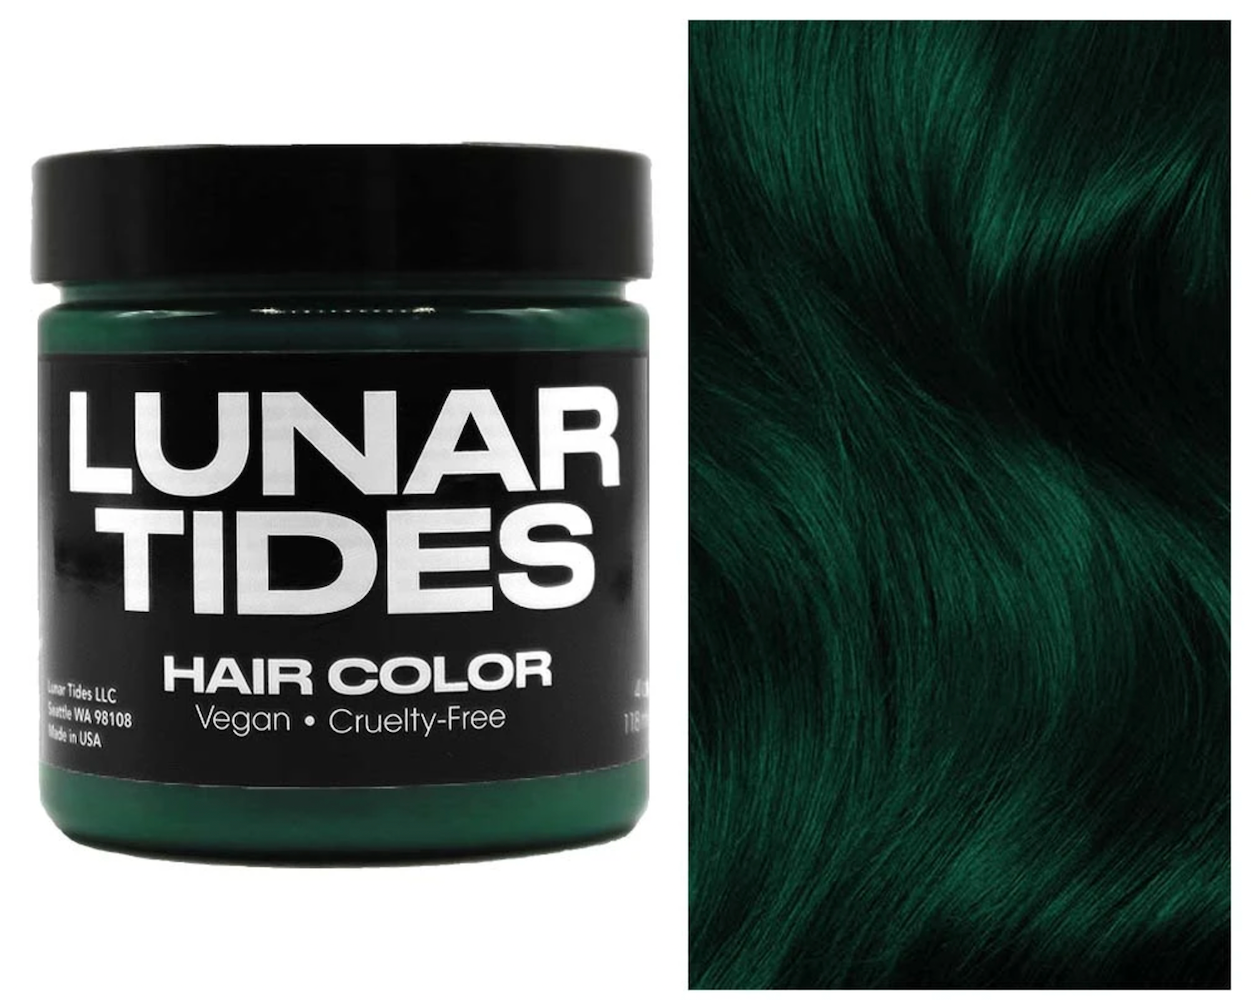 Colorist Created Aurora Australis Hair With Blue, Green, and